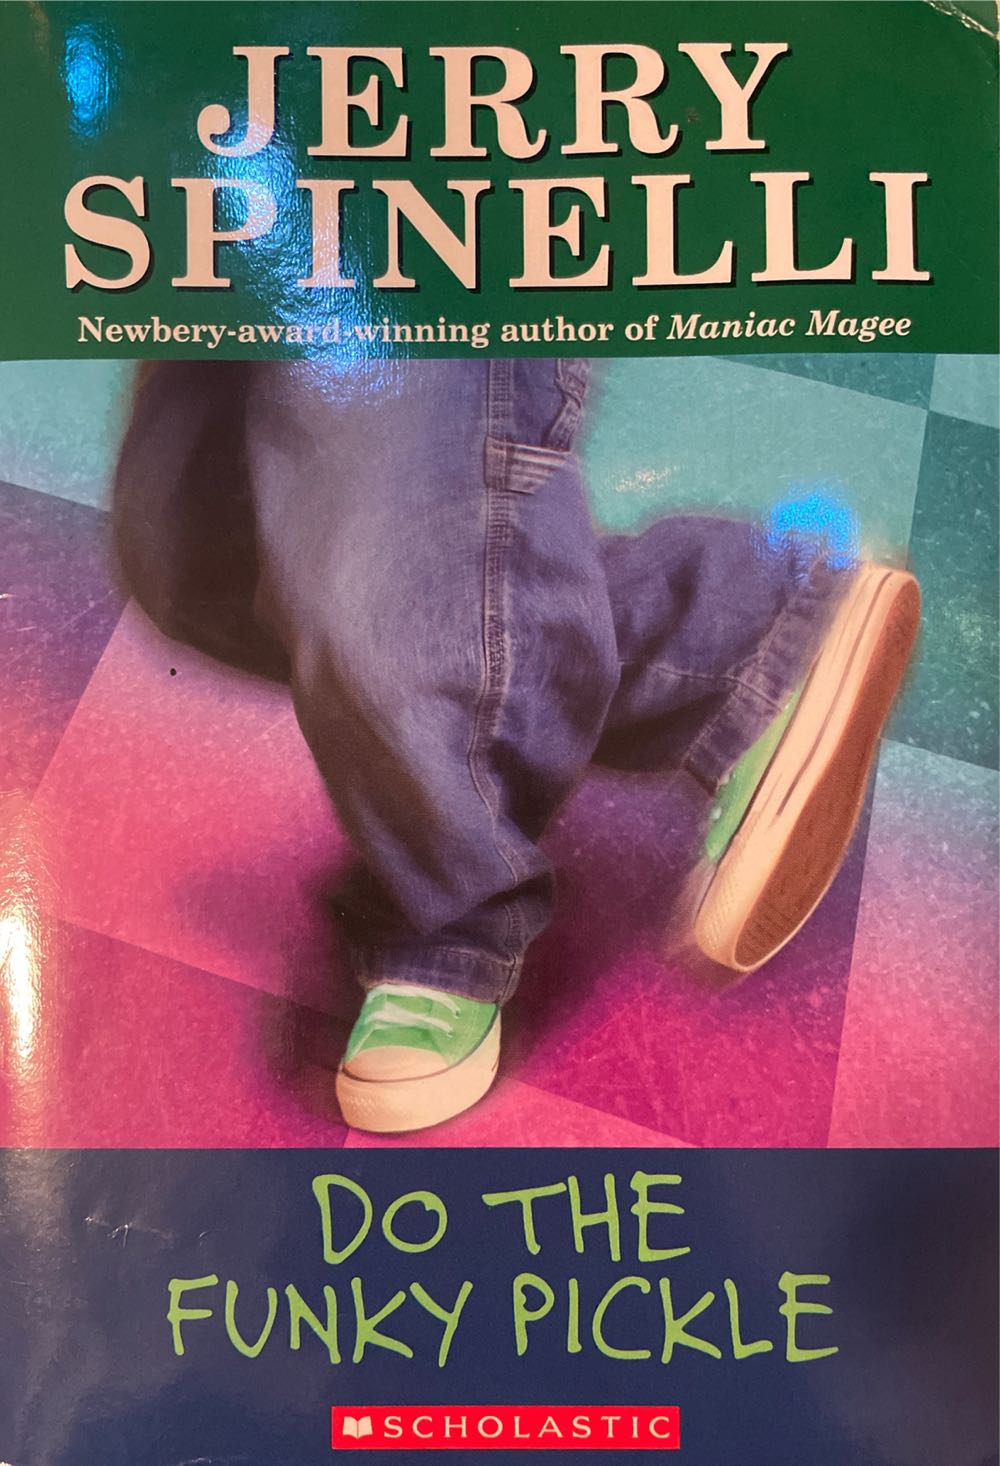 Do The Funky Pickle - Jerry Spinelli (Scholastic Paperbacks - Paperback) book collectible [Barcode 9780590454483] - Main Image 3